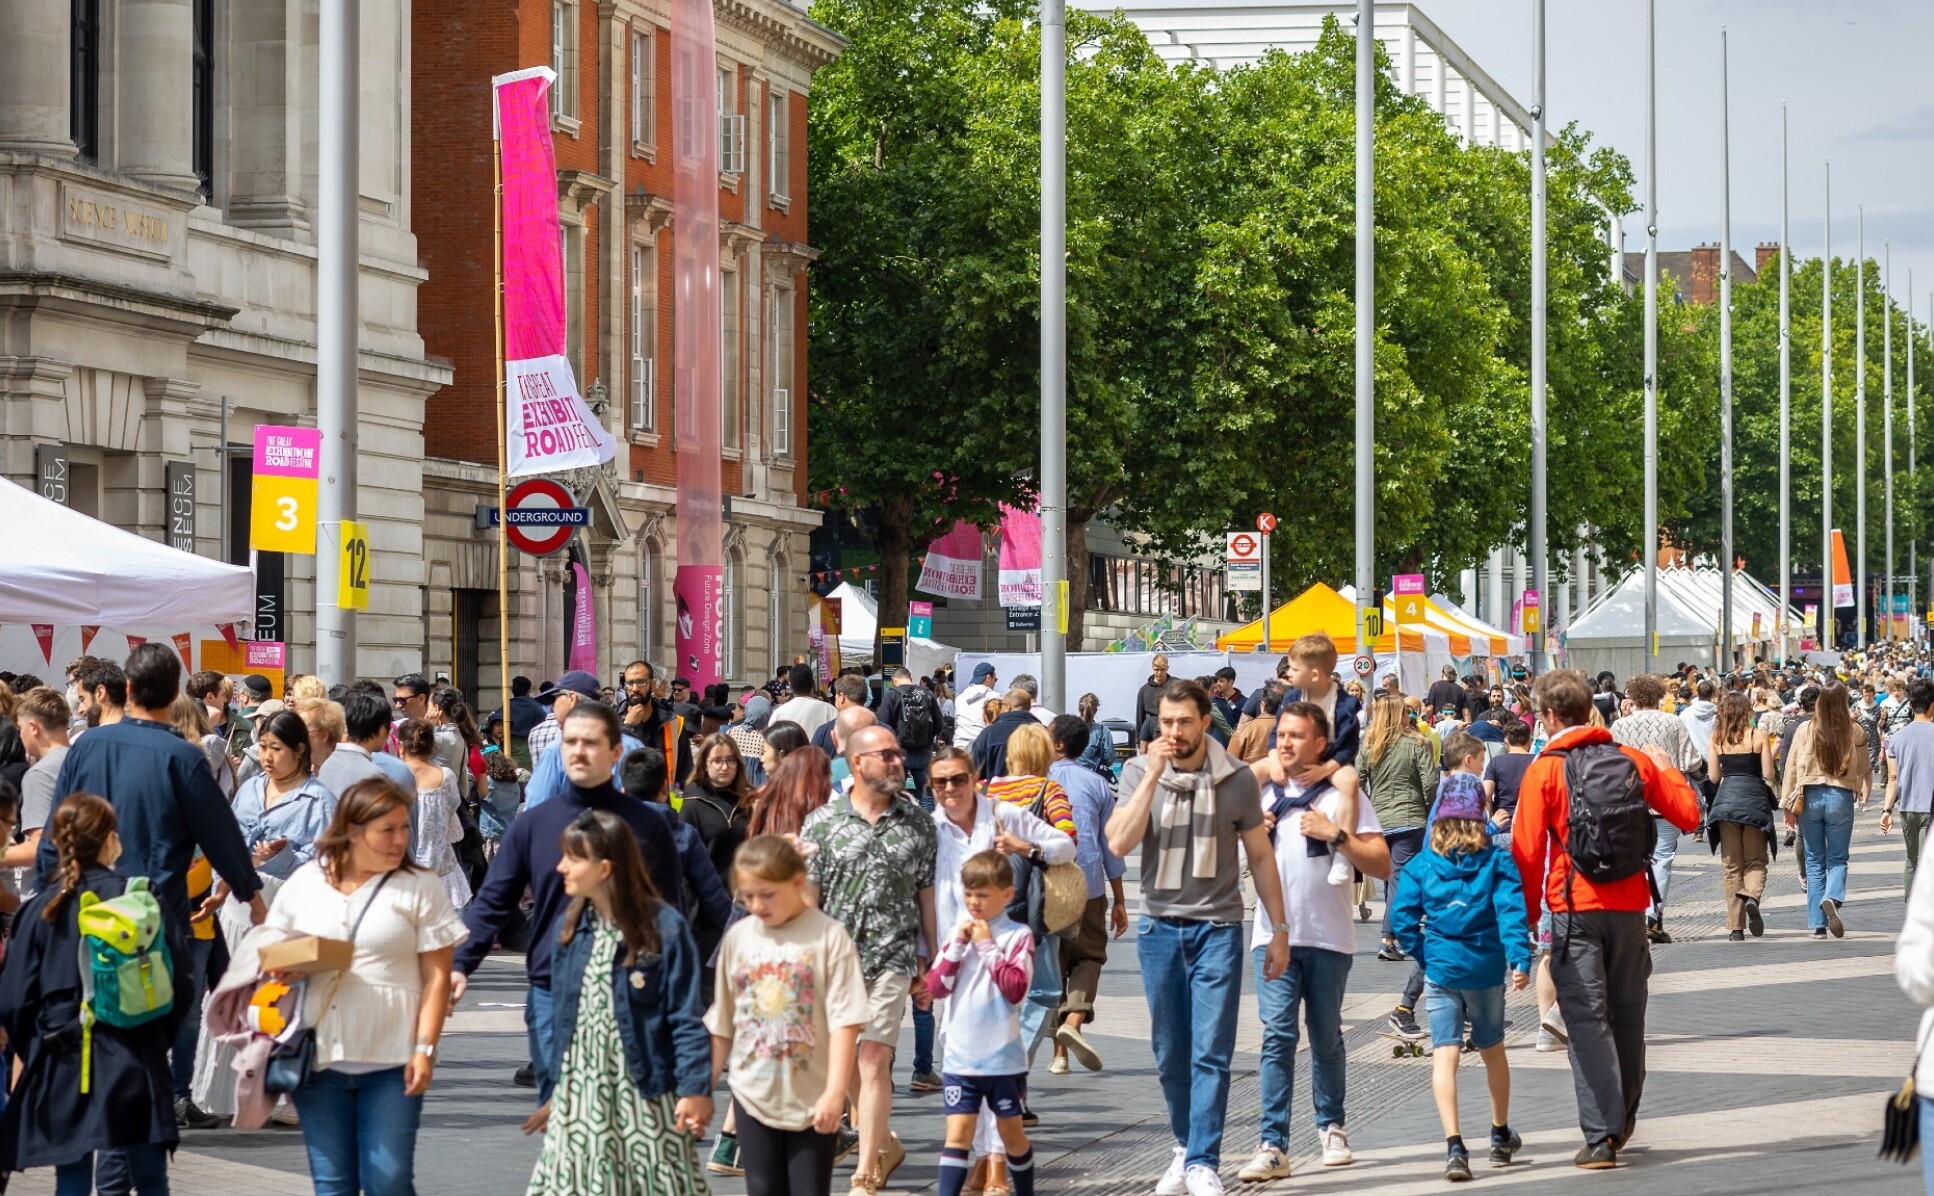 Members of the public walking through Exhibition Road during the Festival last year.